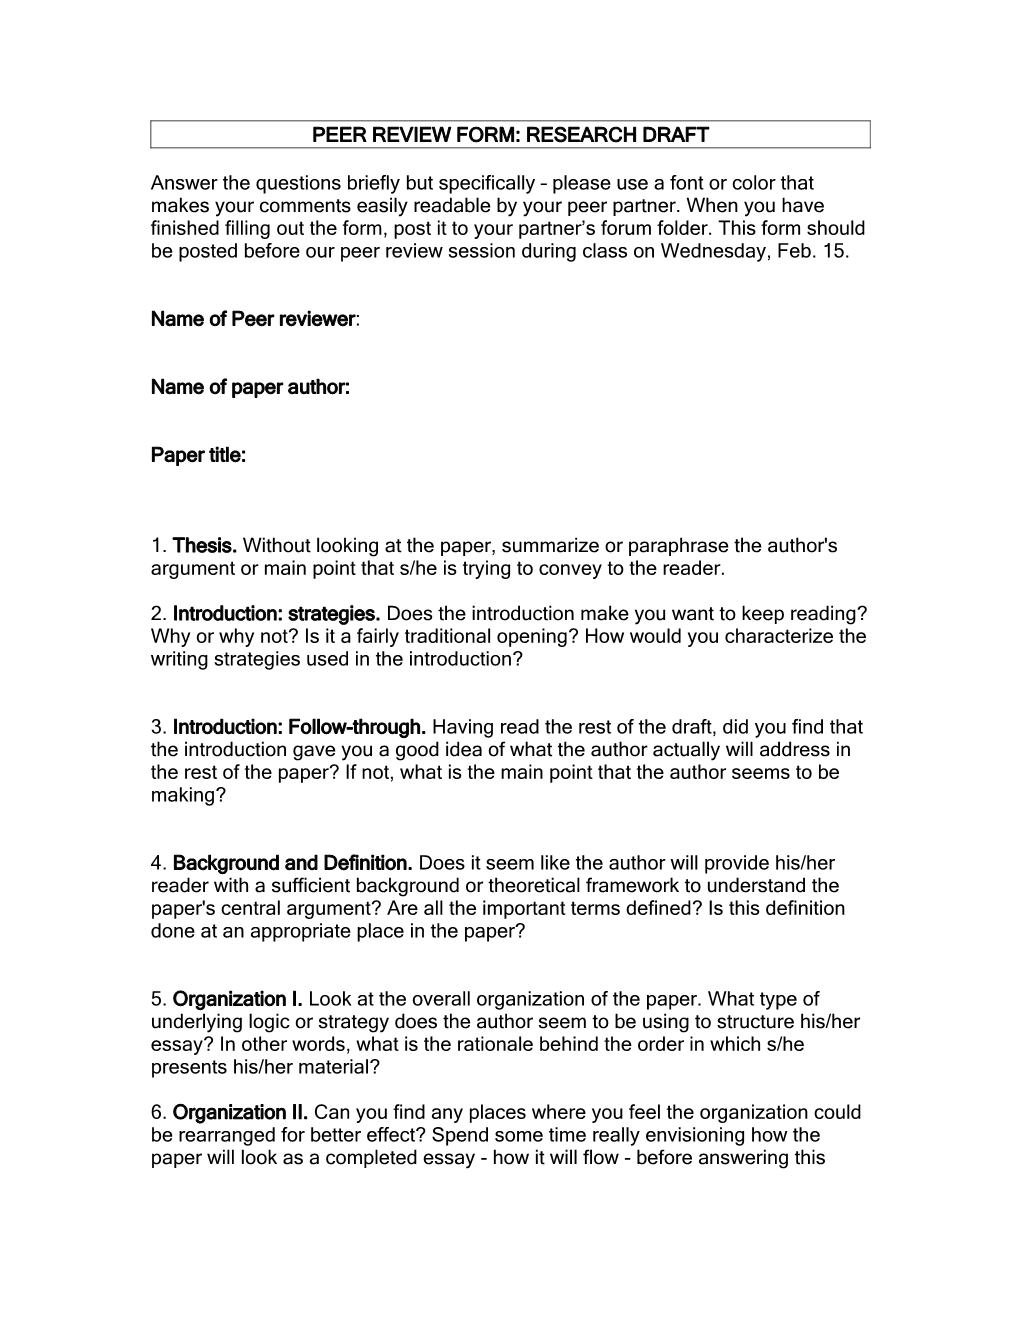 Peer Review Form: Research Draft #1